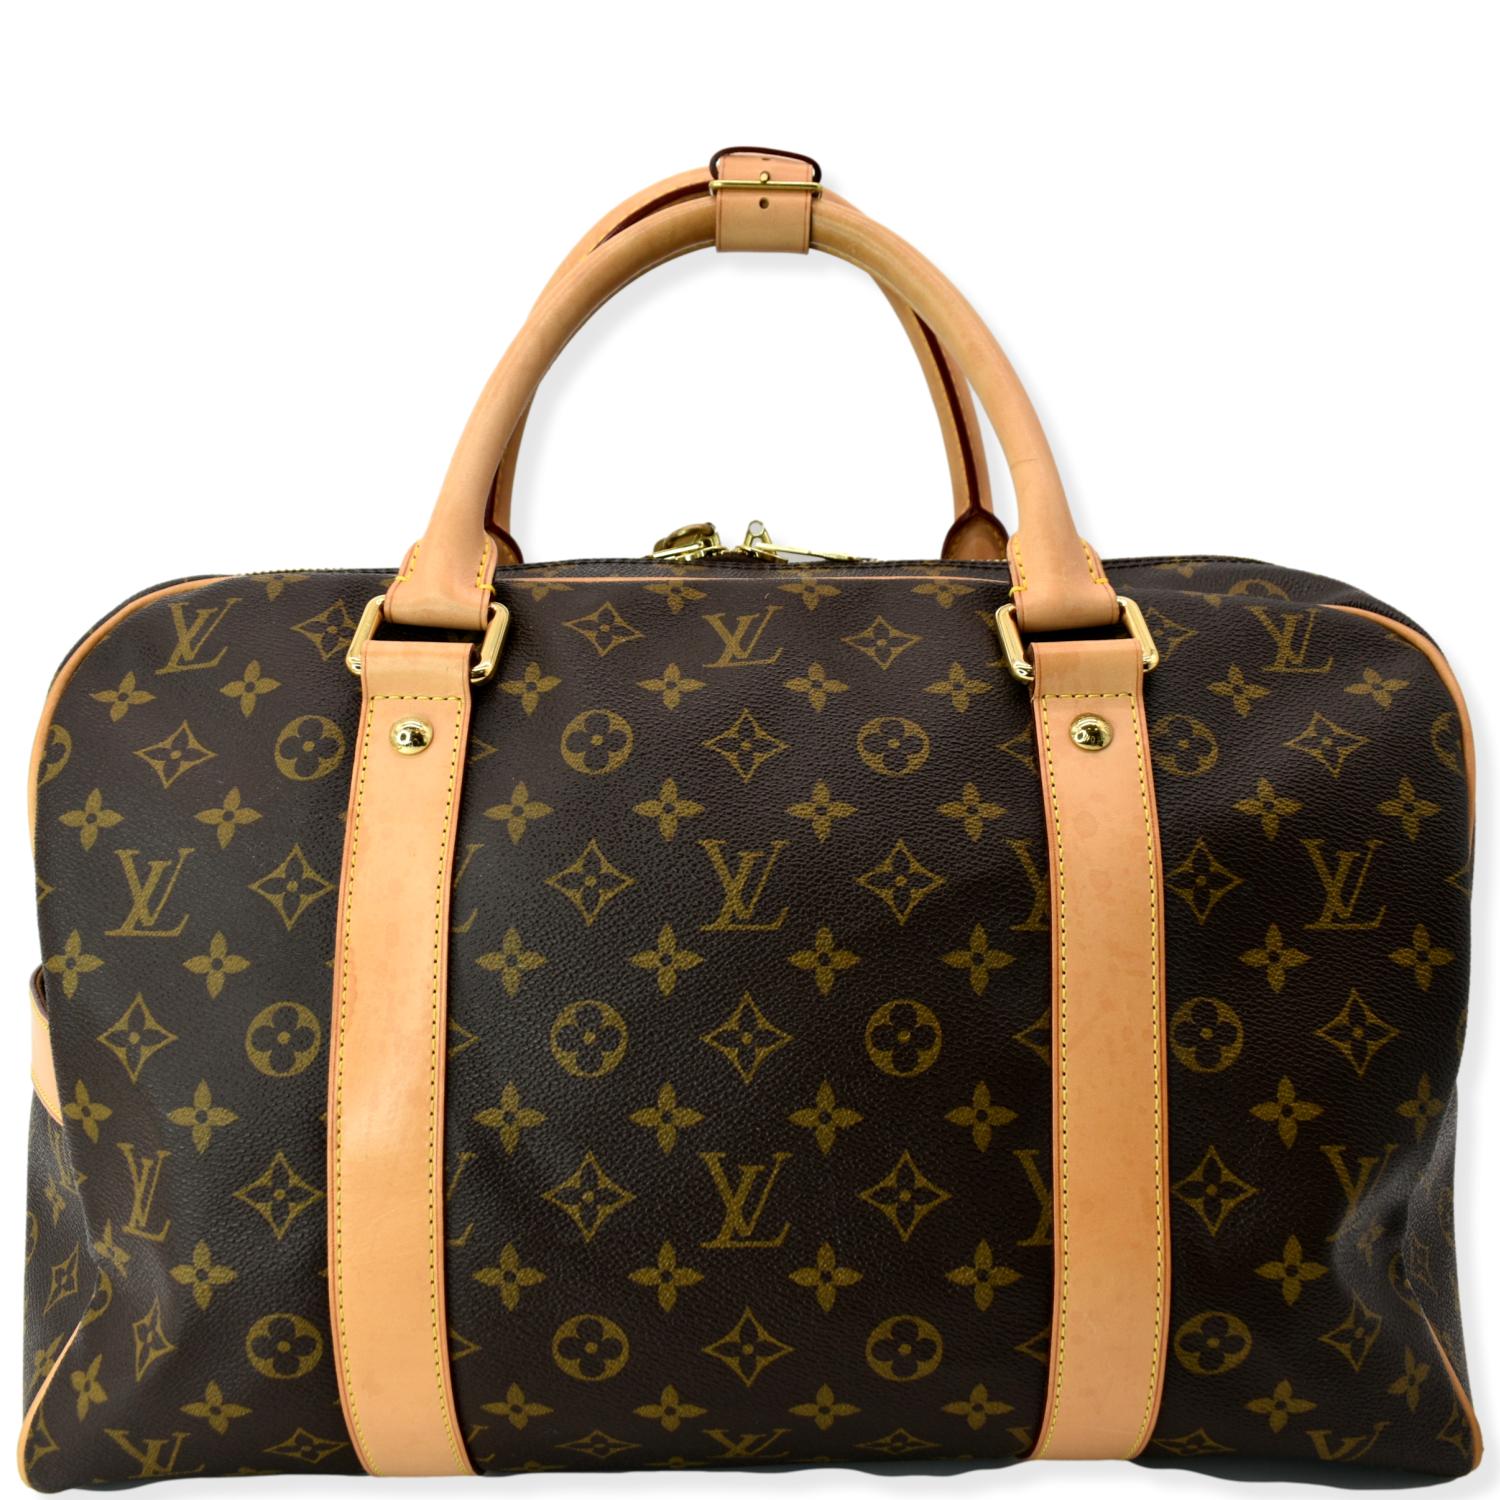 🤔LOUIS VUITTON CARRY ALL PM PROS AND CONS, INVEST IN HAND BAGS YOU LOVE